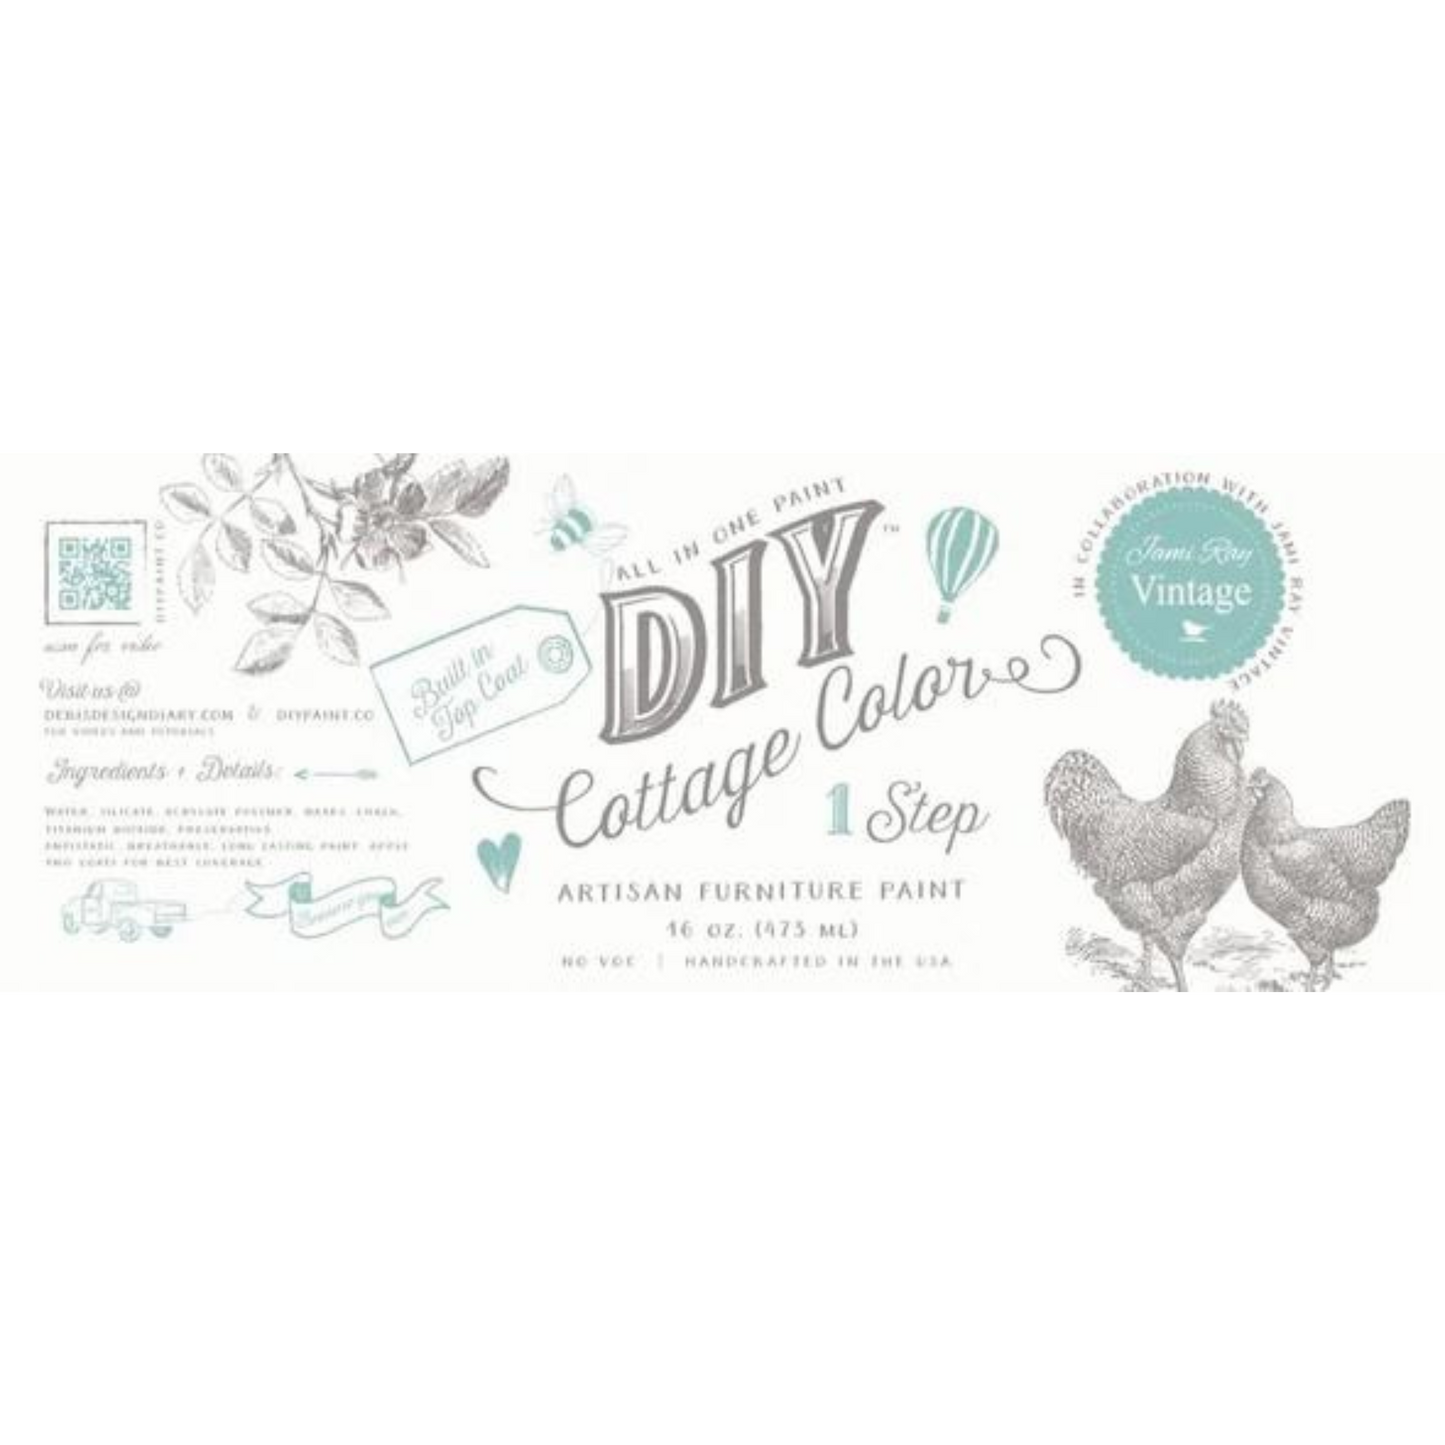 DIY Cottage Color Paint curated by Jamie Ray Vintage. Product label detail. Available in pints at Milton's Daughter.